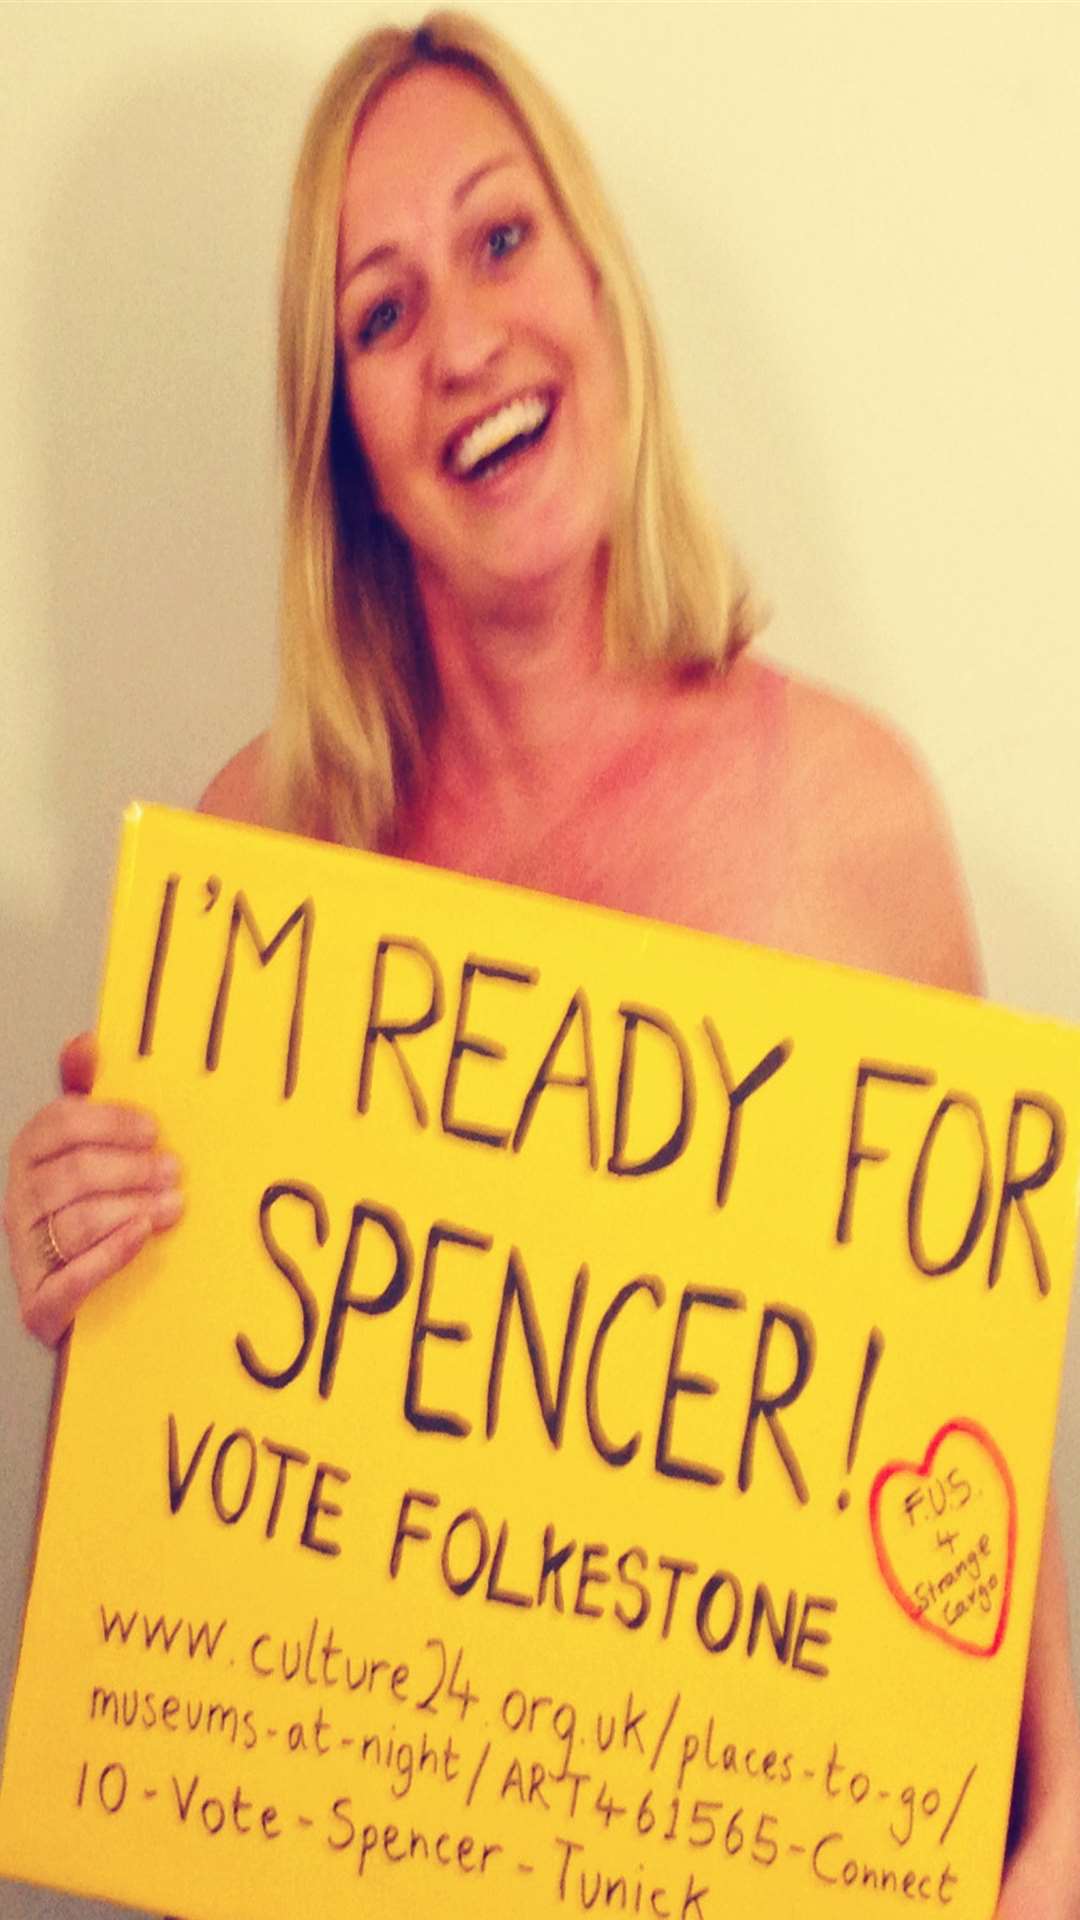 Kay McLoughlin kicked off the 'Ready for Spencer' campaign